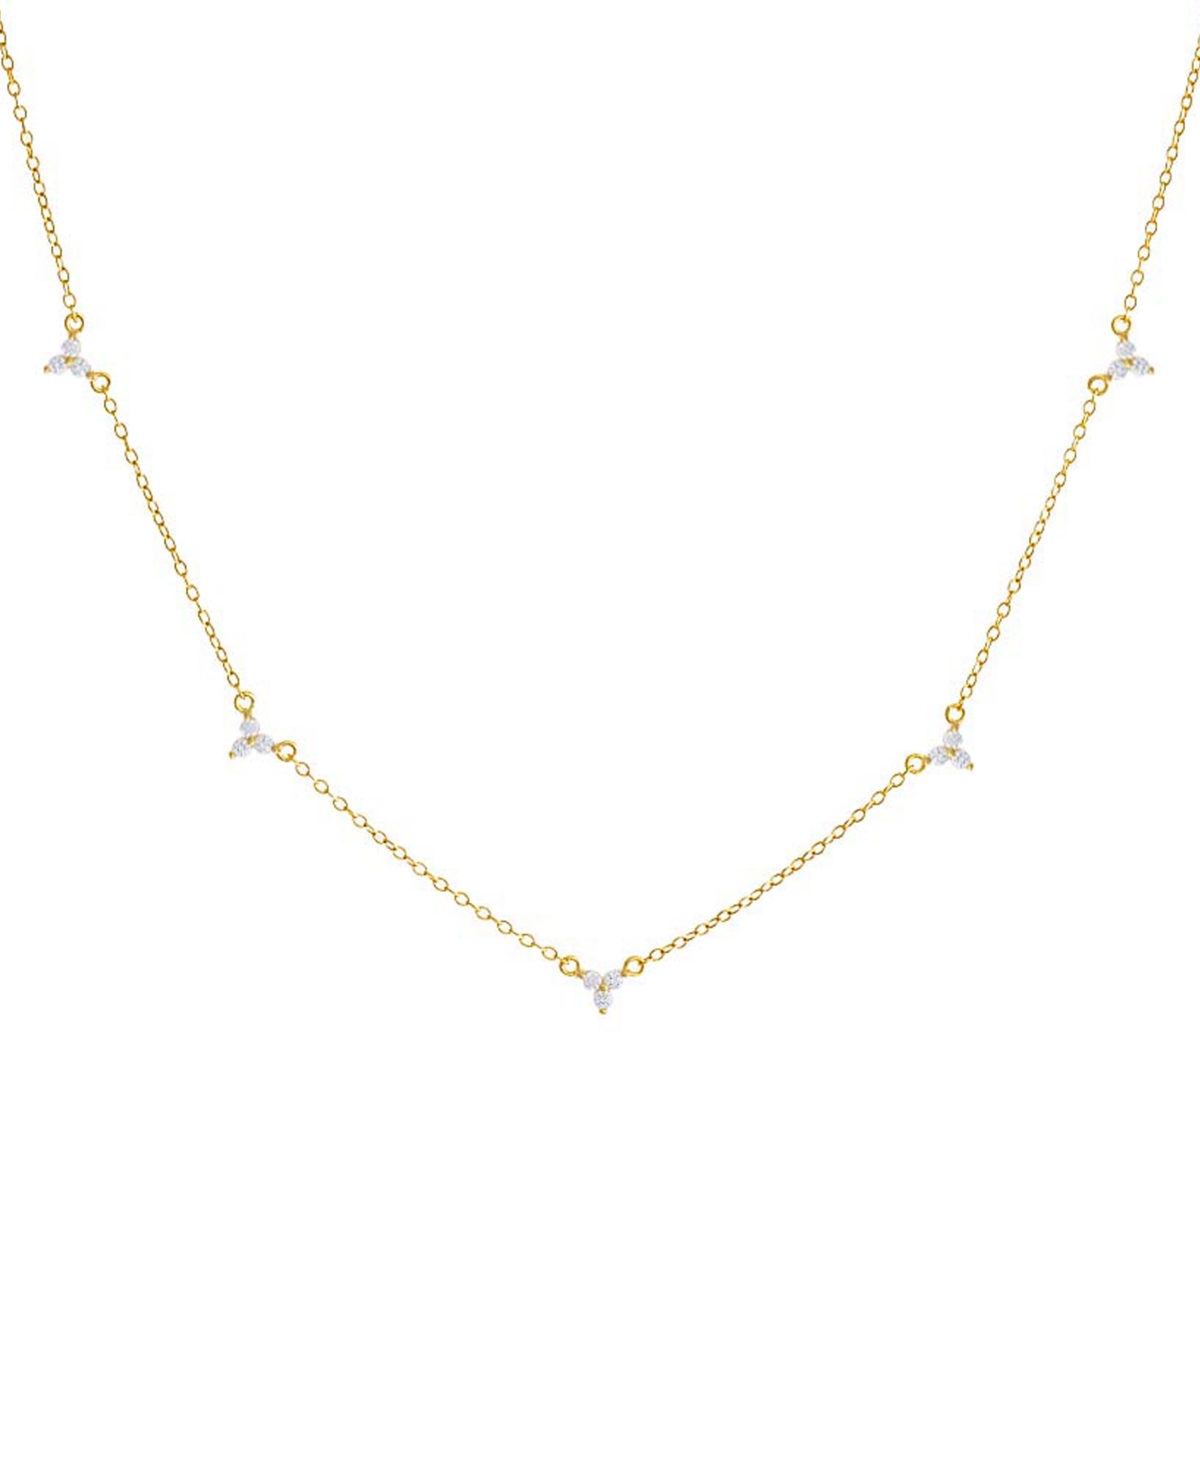 by Adina Eden 14k Gold-Plated Sterling Silver Cubic Zirconia Cluster Chain Necklace, 16" + 2" extender